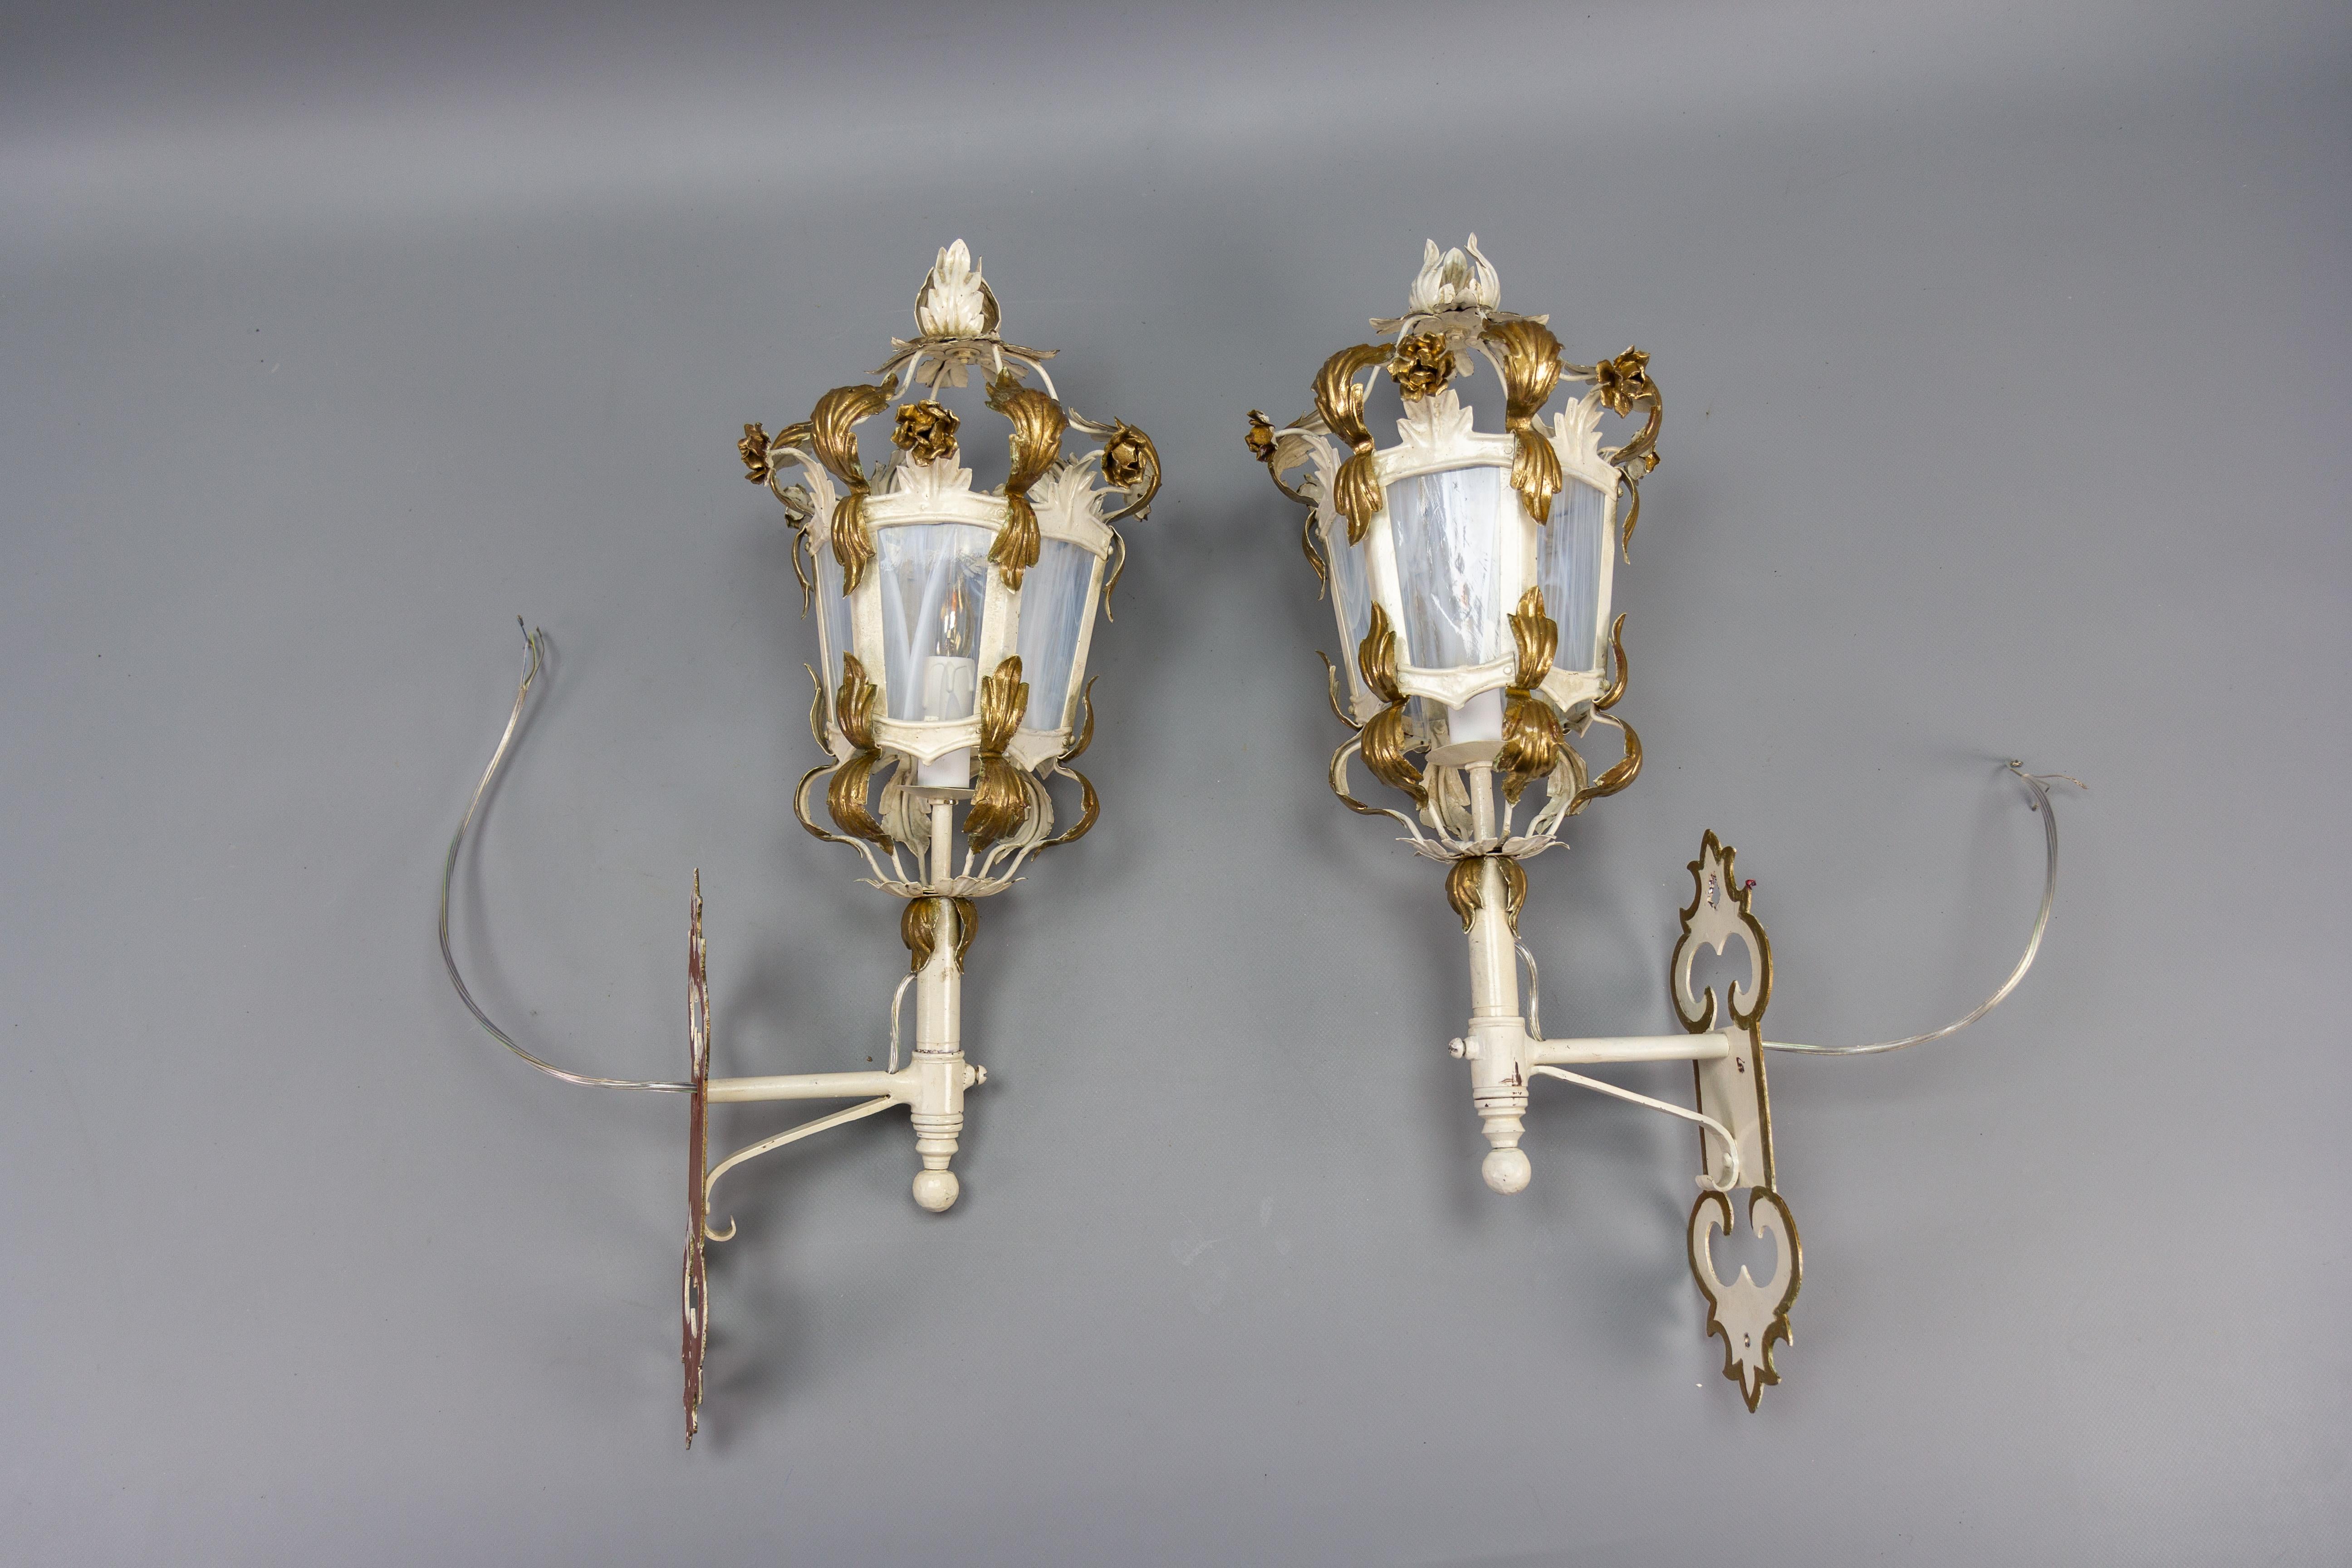 Pair of Italian White and Golden Color Metal and Glass Wall Lanterns, ca. 1970s For Sale 8